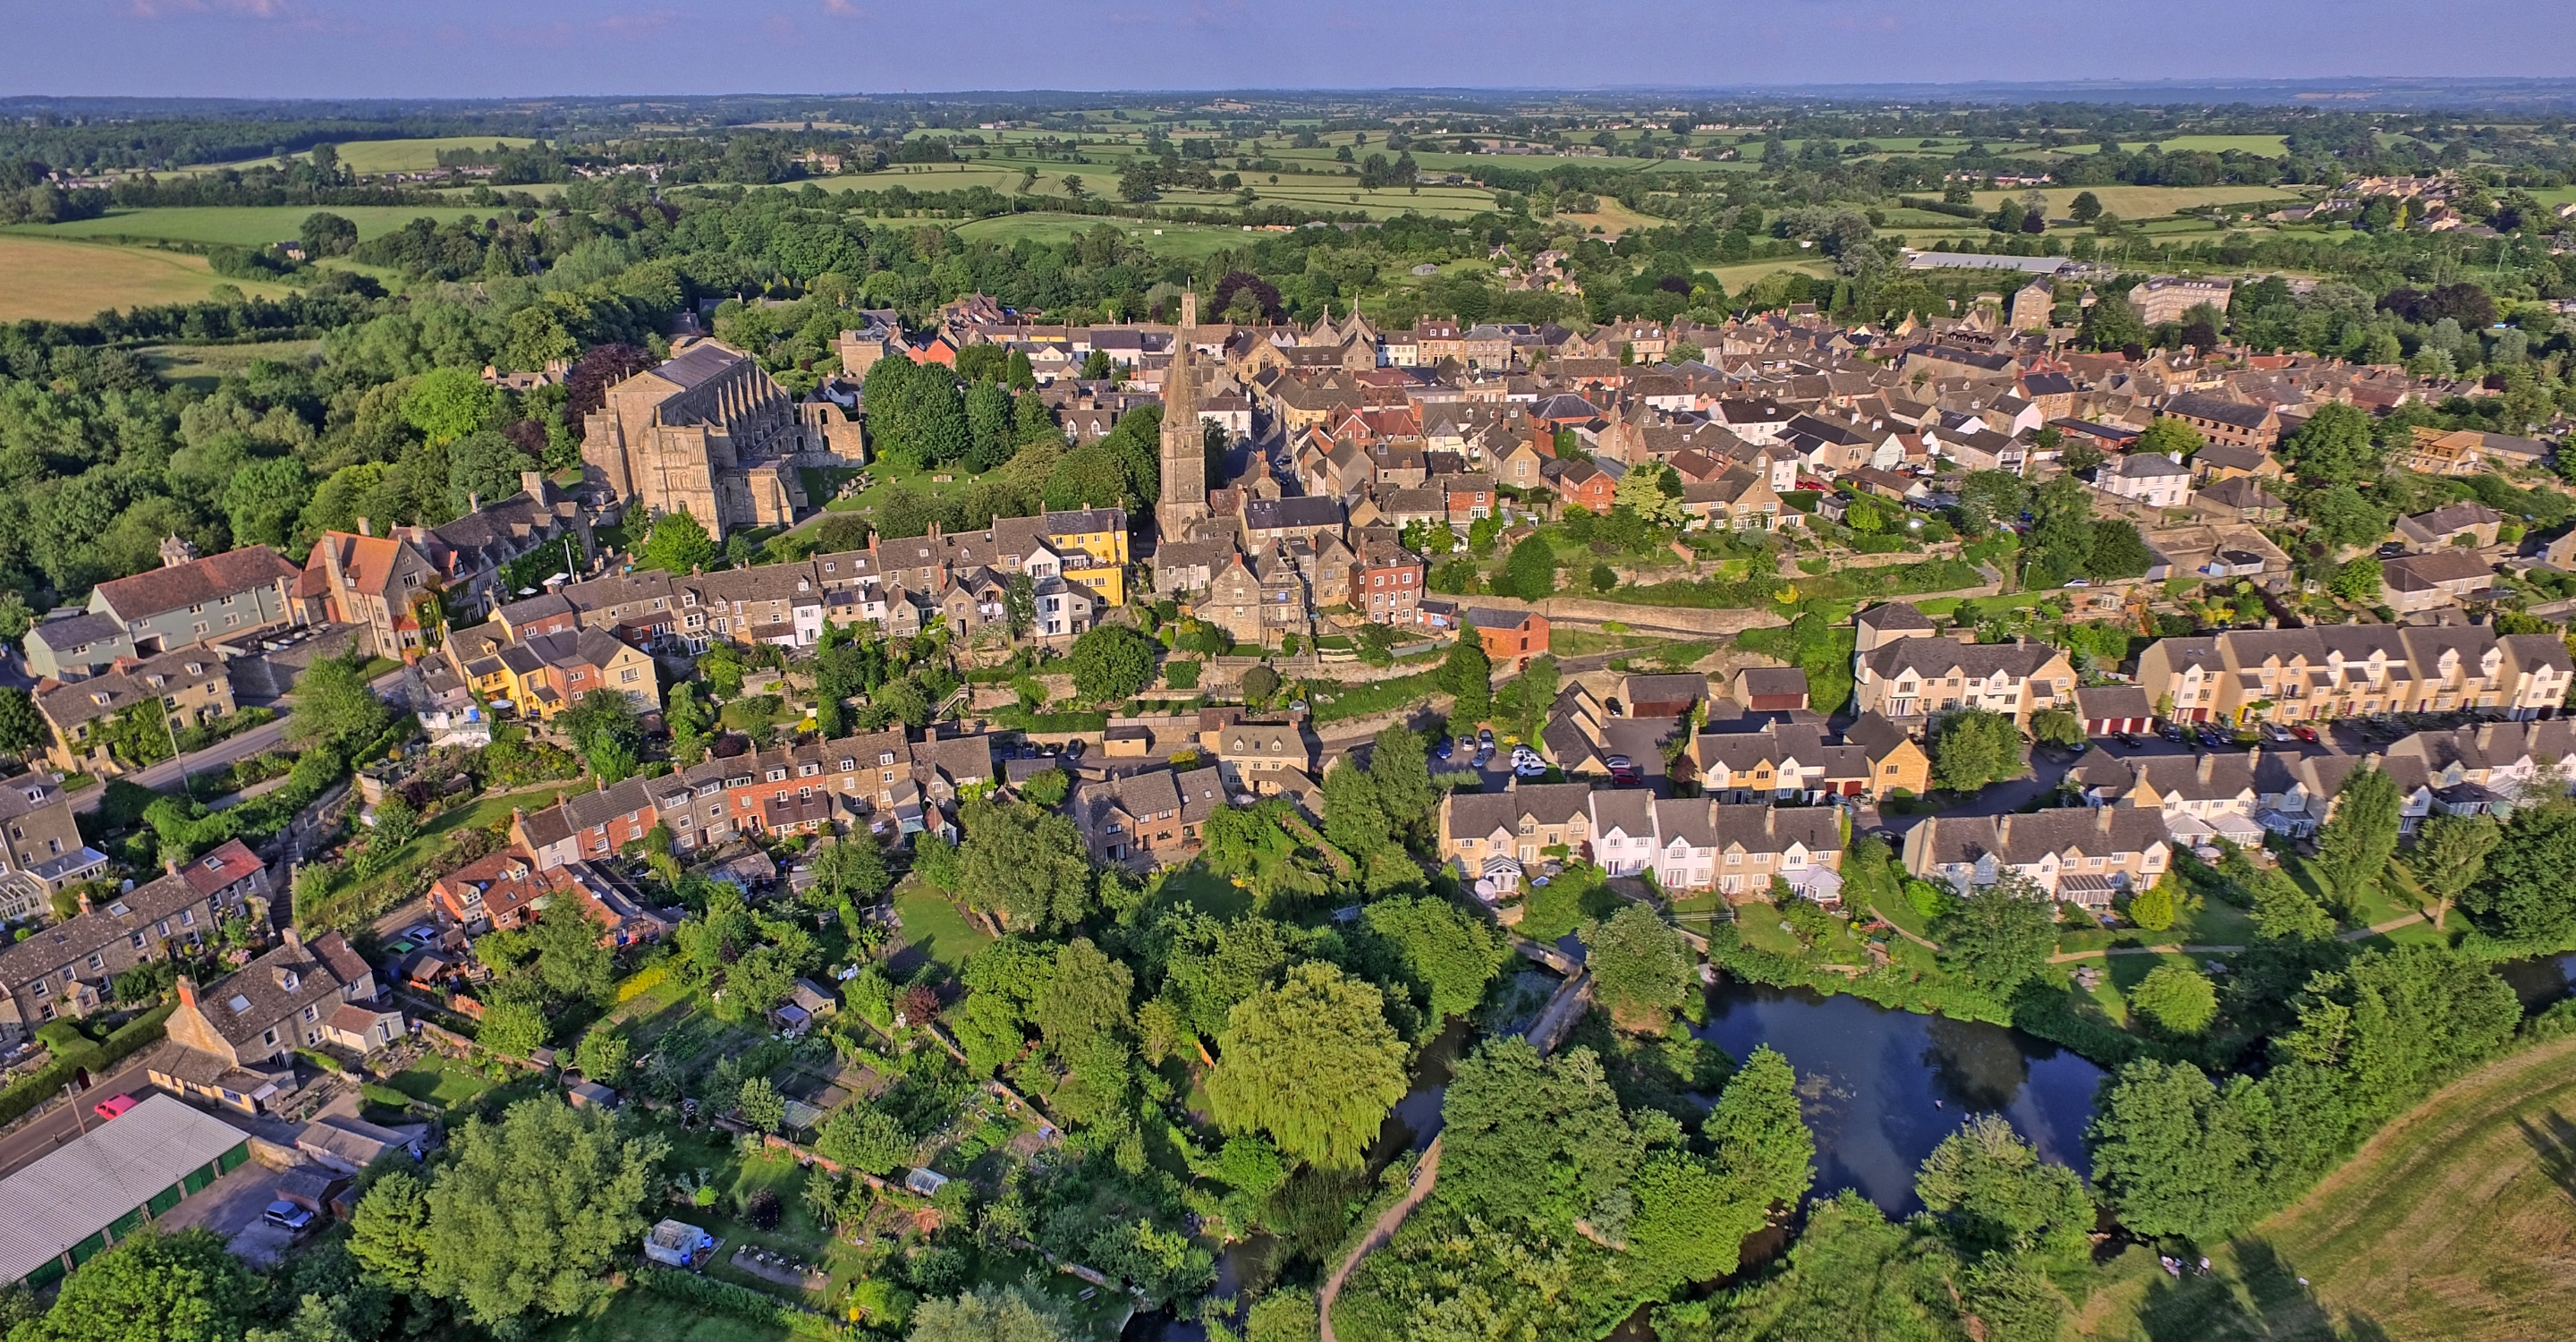 Aerial view of a country village in the Cotswolds, England